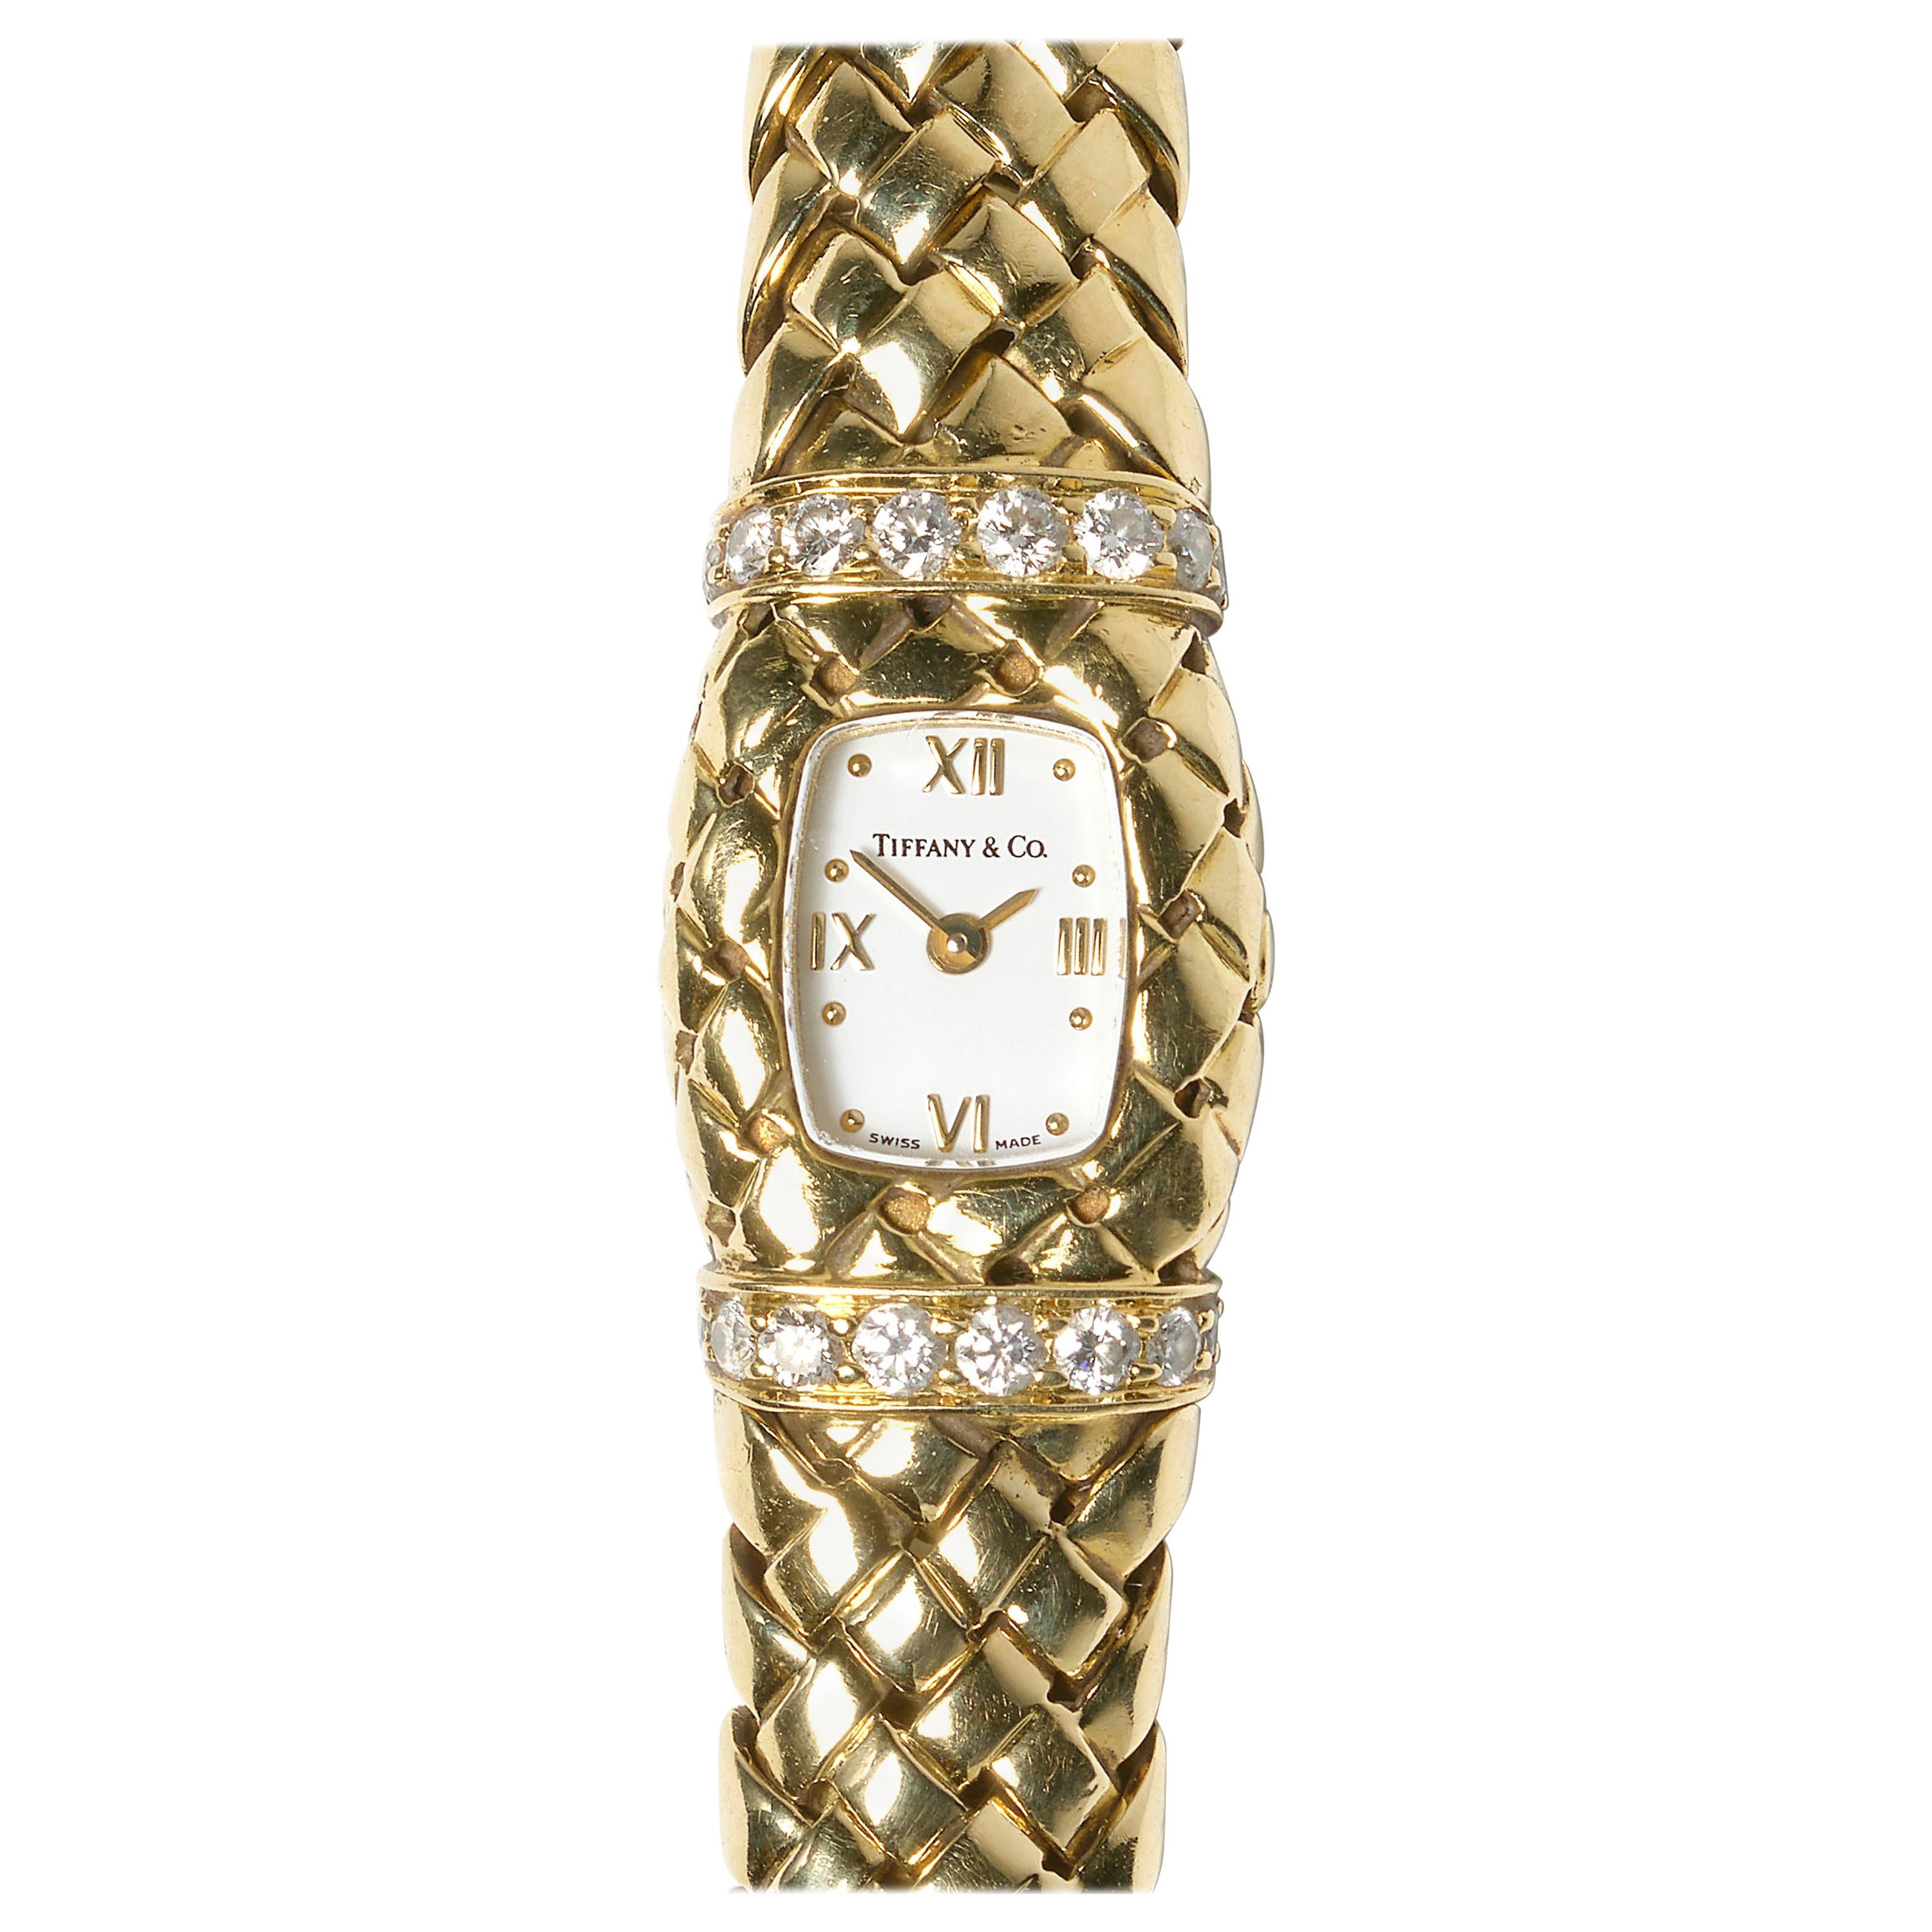 Tiffany & Co. Diamond and Gold "Vannerie" Wristwatch For Sale